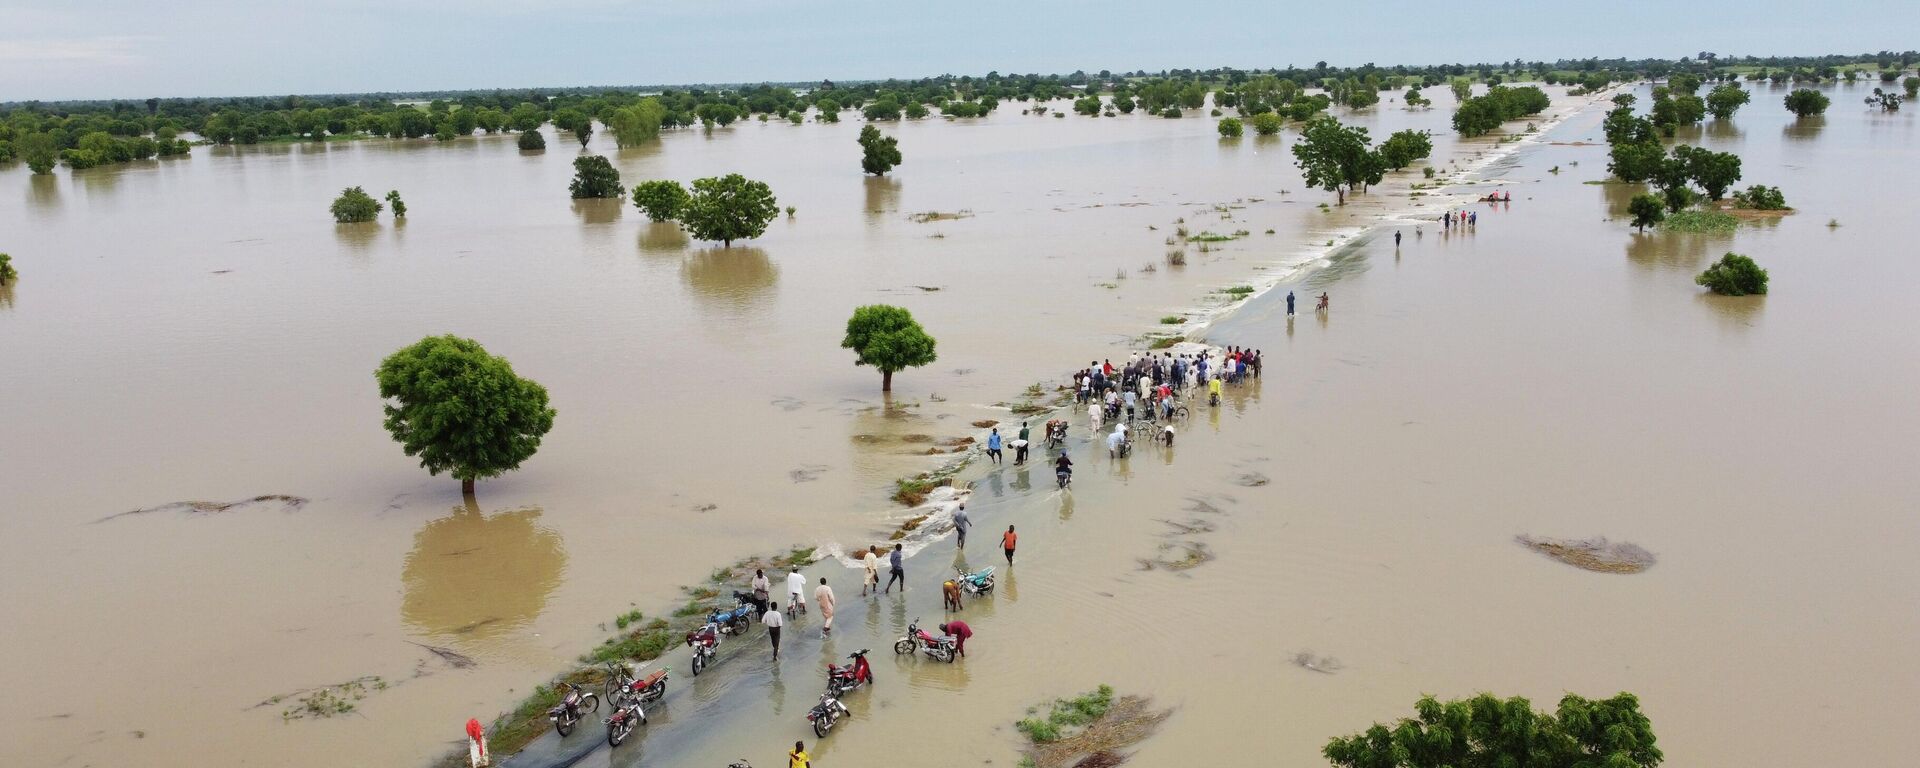 People walk through floodwaters after heavy rainfall in Hadeja, Nigeria, Monday, Sept 19, 2022. Nigeria is battling its worst floods in a decade with more than 300 people killed in 2021 including at least 20 this week, authorities told the Associated Press on Monday. - Sputnik International, 1920, 01.11.2022